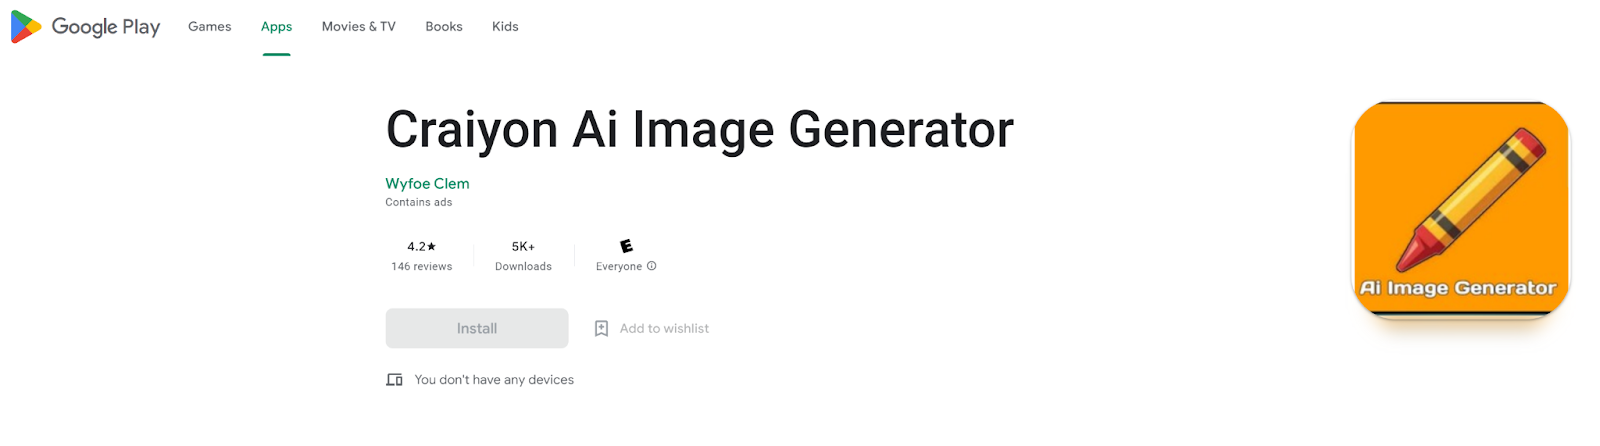 The Craiyon AI Image Generator available for Android phones on the Google Play store.